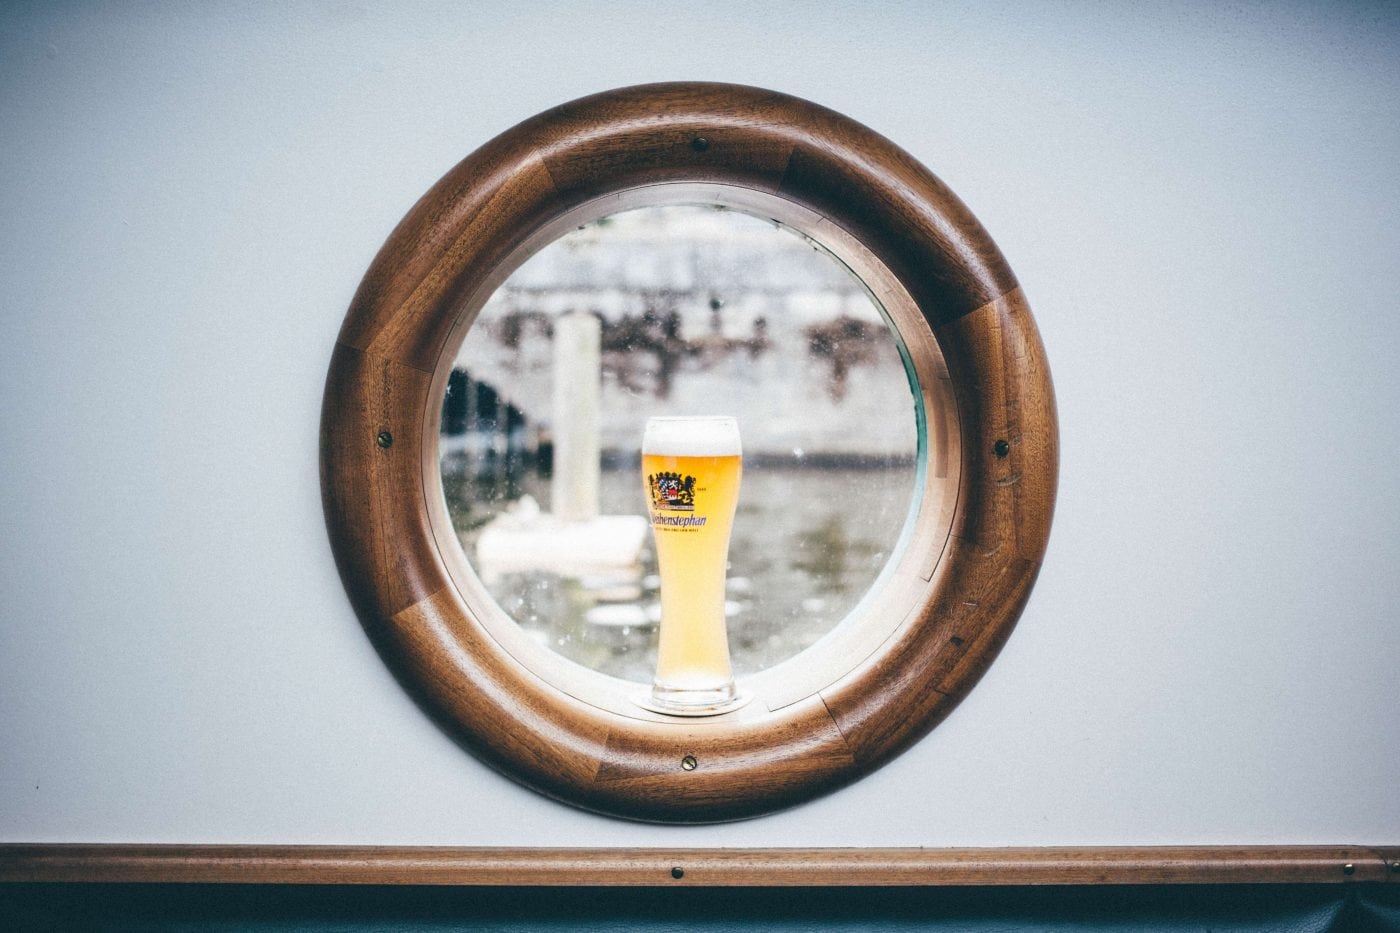 European Beer-cation: To Cruise or not to Cruise?